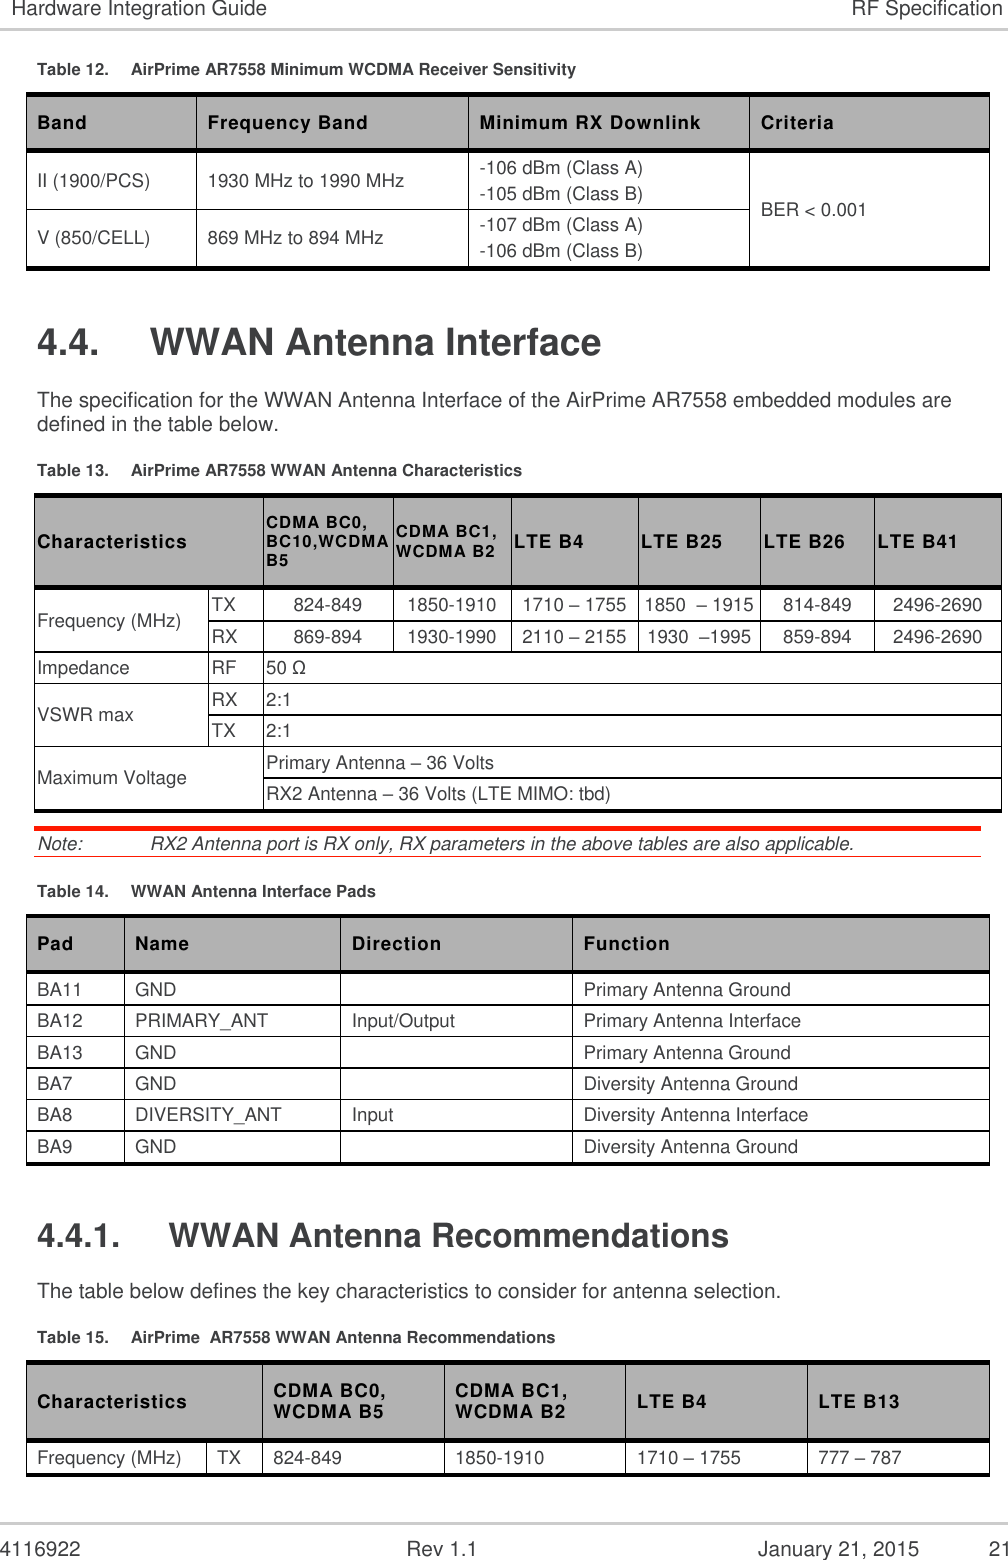   4116922              Rev 1.1          January 21, 2015  21 Hardware Integration Guide RF Specification Table 12.  AirPrime AR7558 Minimum WCDMA Receiver Sensitivity Band Frequency Band Minimum RX Downlink Criteria II (1900/PCS) 1930 MHz to 1990 MHz -106 dBm (Class A) -105 dBm (Class B) BER &lt; 0.001 V (850/CELL) 869 MHz to 894 MHz -107 dBm (Class A) -106 dBm (Class B) 4.4.  WWAN Antenna Interface The specification for the WWAN Antenna Interface of the AirPrime AR7558 embedded modules are defined in the table below. Table 13.  AirPrime AR7558 WWAN Antenna Characteristics Characteristics CDMA BC0, BC10,WCDMA B5 CDMA BC1, WCDMA B2 LTE B4 LTE B25 LTE B26 LTE B41 Frequency (MHz) TX 824-849 1850-1910 1710 – 1755 1850  – 1915 814-849 2496-2690 RX 869-894 1930-1990 2110 – 2155 1930  –1995 859-894 2496-2690 Impedance RF 50 Ω VSWR max RX 2:1 TX 2:1 Maximum Voltage Primary Antenna – 36 Volts RX2 Antenna – 36 Volts (LTE MIMO: tbd) Note:   RX2 Antenna port is RX only, RX parameters in the above tables are also applicable. Table 14.  WWAN Antenna Interface Pads Pad Name Direction Function BA11 GND  Primary Antenna Ground BA12 PRIMARY_ANT Input/Output Primary Antenna Interface BA13 GND  Primary Antenna Ground BA7 GND  Diversity Antenna Ground BA8 DIVERSITY_ANT Input Diversity Antenna Interface BA9 GND  Diversity Antenna Ground 4.4.1.  WWAN Antenna Recommendations The table below defines the key characteristics to consider for antenna selection. Table 15.  AirPrime  AR7558 WWAN Antenna Recommendations Characteristics CDMA BC0, WCDMA B5 CDMA BC1, WCDMA B2 LTE B4 LTE B13 Frequency (MHz) TX 824-849 1850-1910 1710 – 1755 777 – 787 